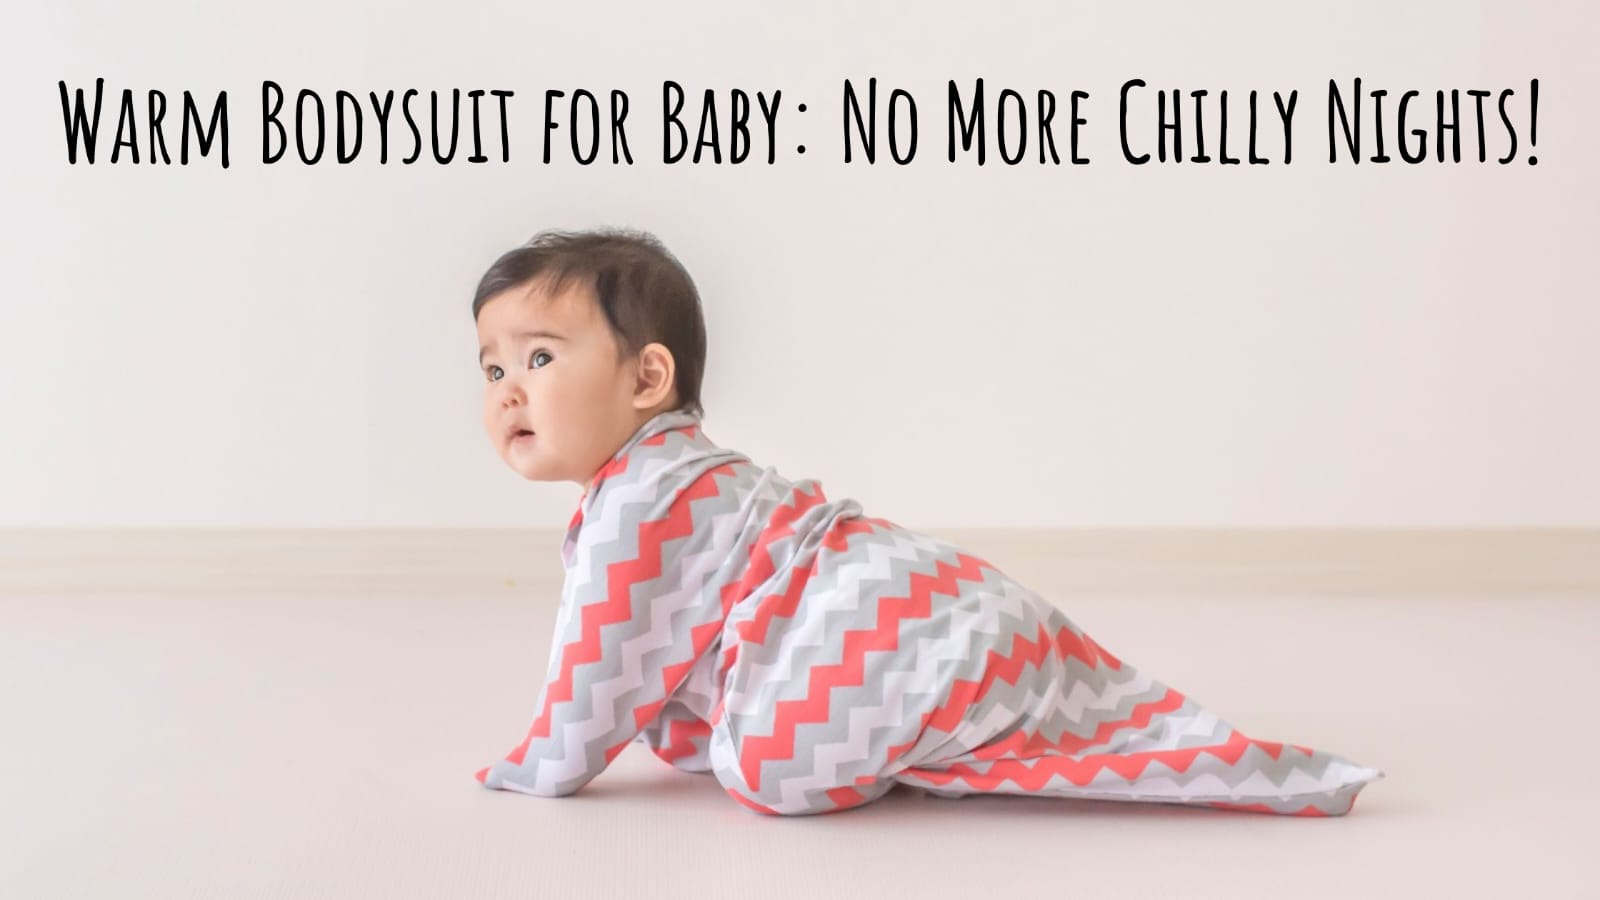 Warm Bodysuit for Baby: No More Chilly Nights! Hero Image